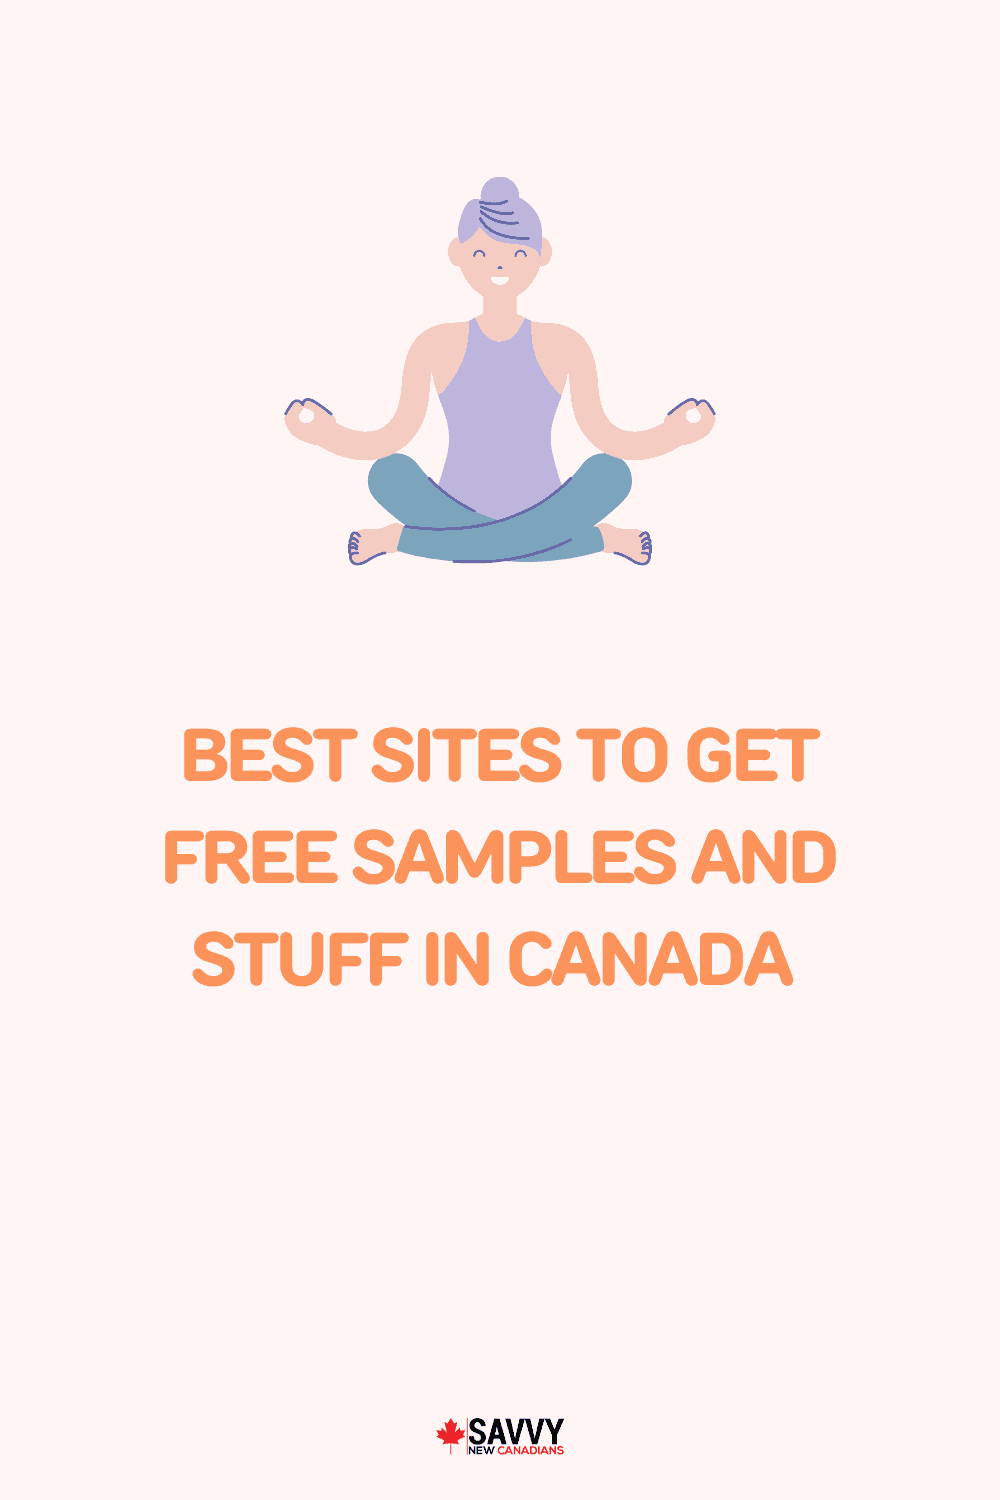 15 Best Sites To Get Free Samples and Stuff in Canada 2022